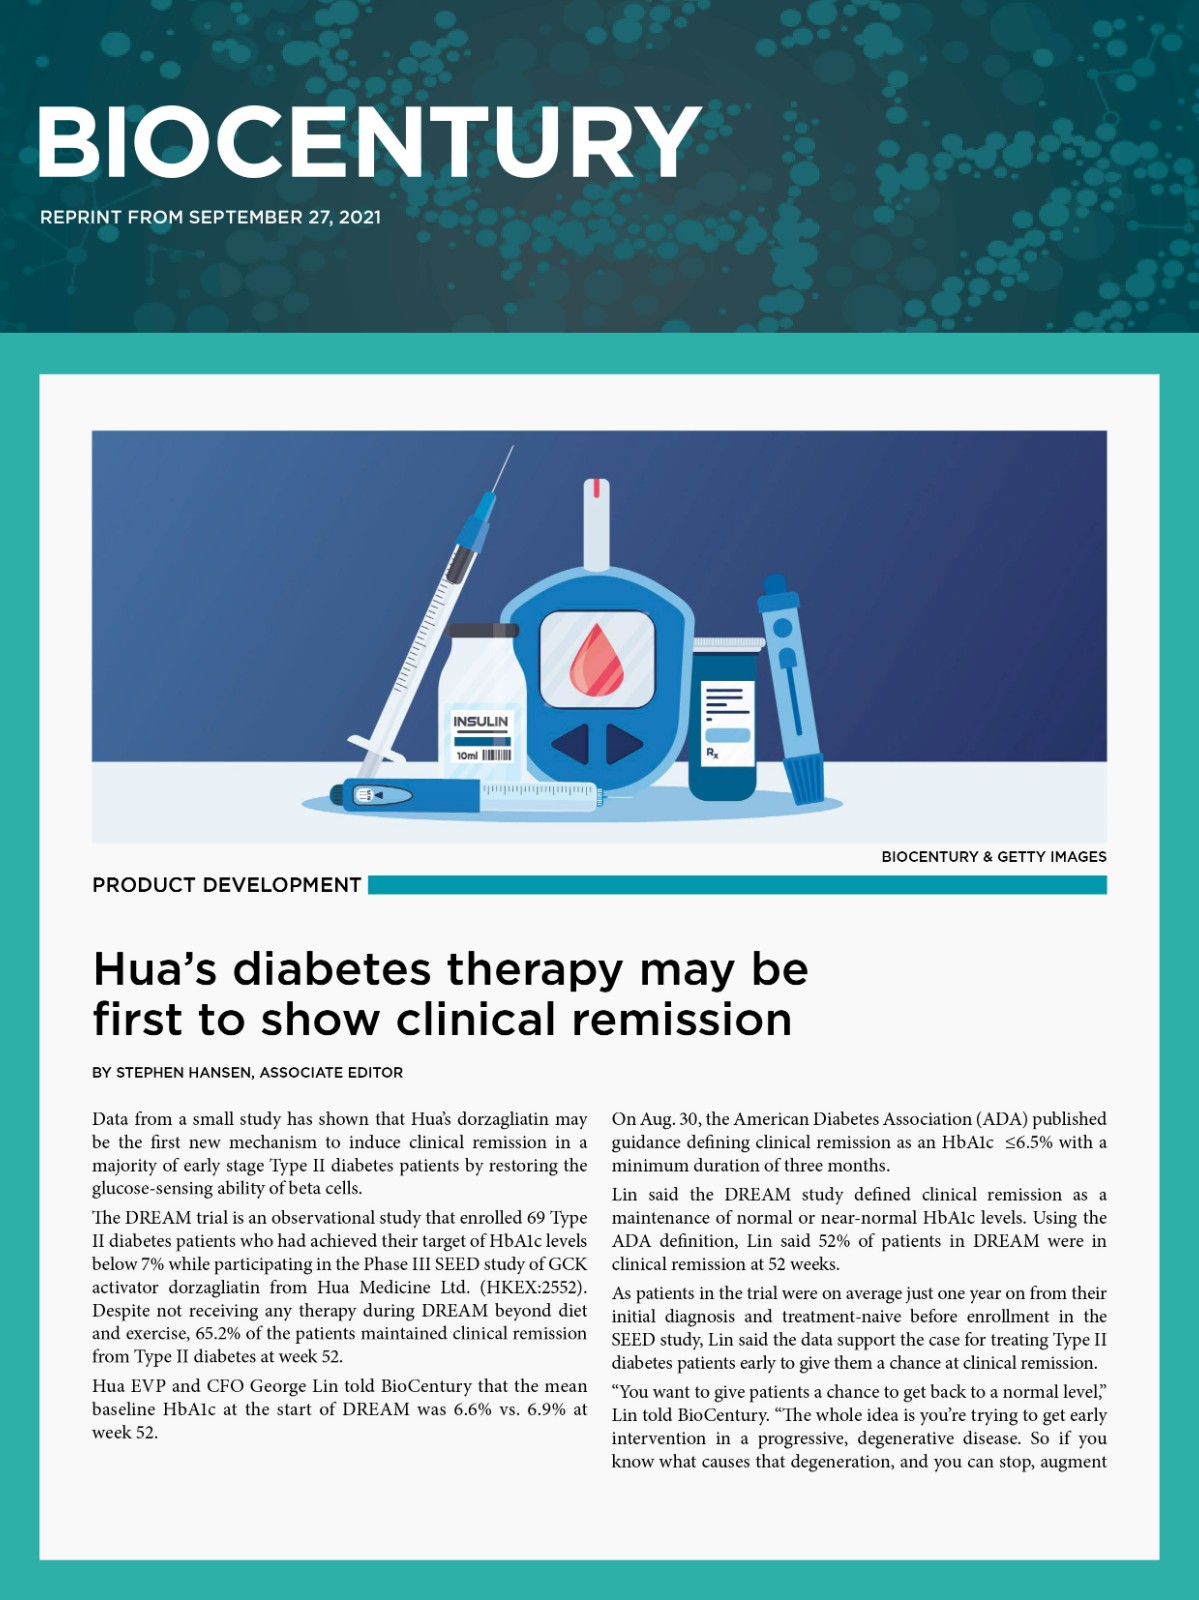 Hua's diabetes therapy may be first to show clinical remission